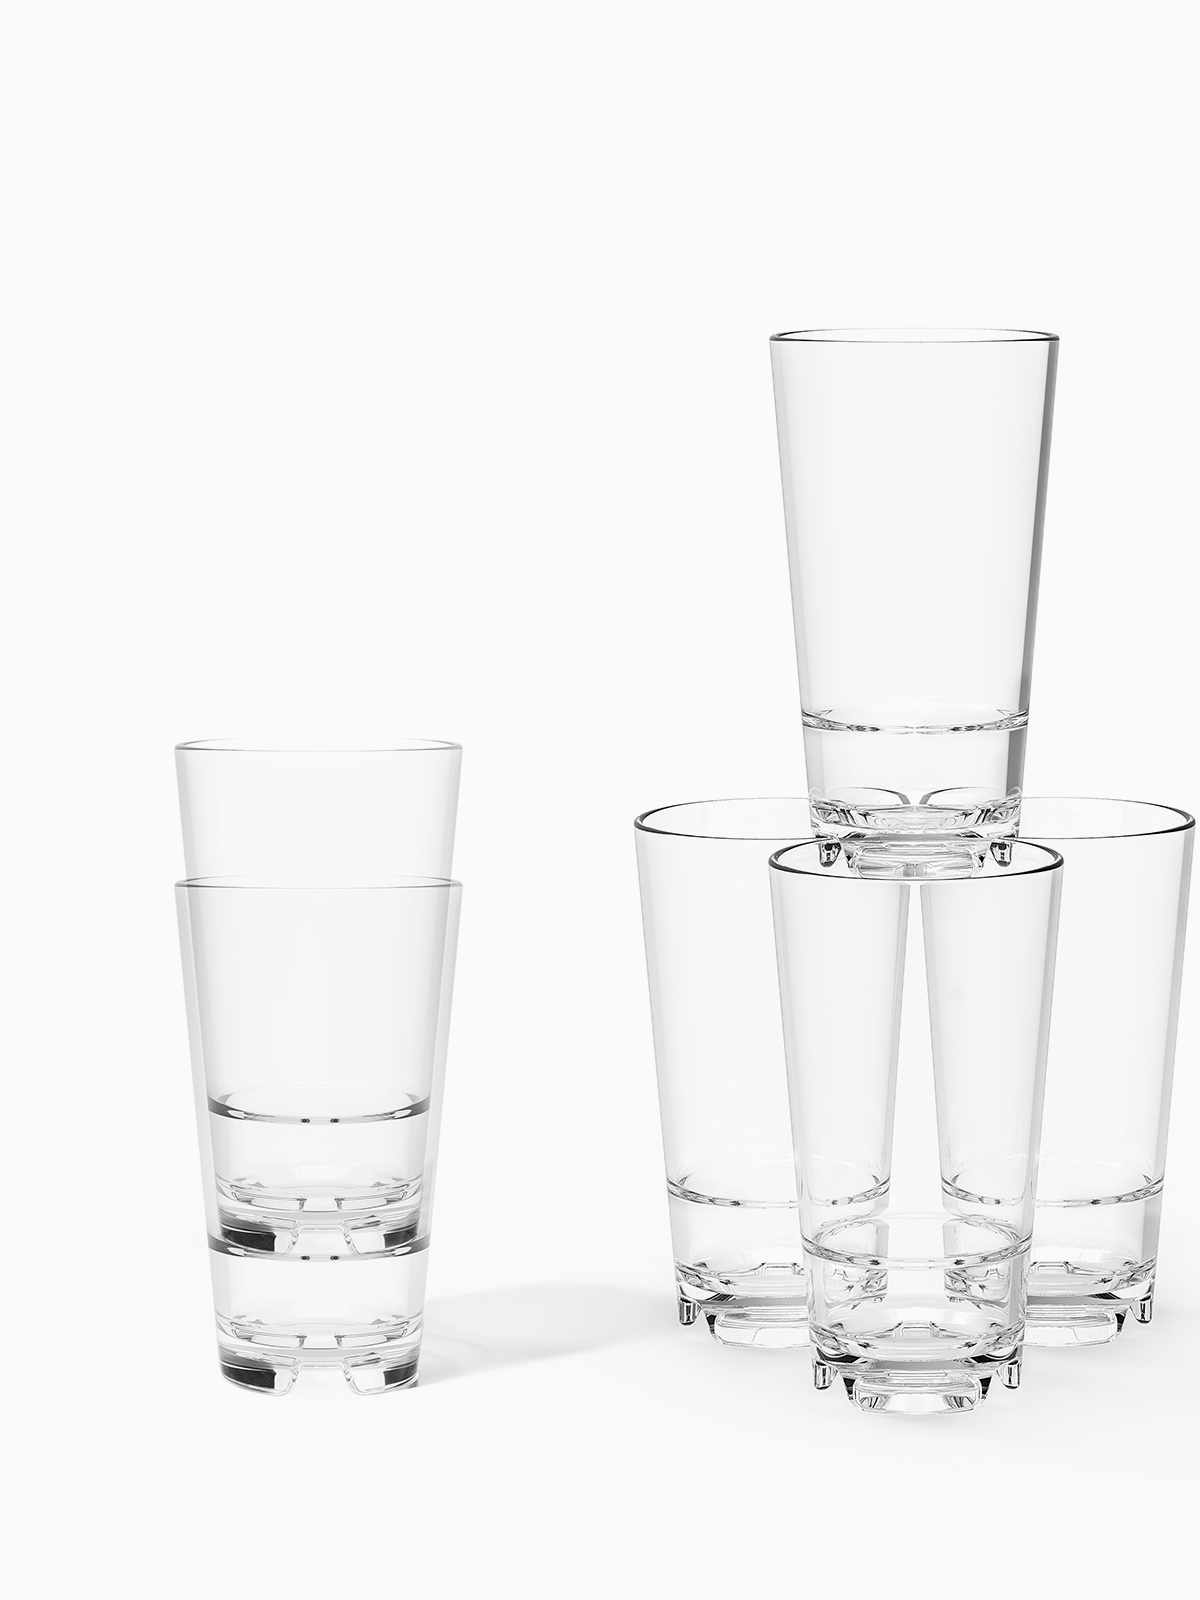 TOSSWARE Reserve 16oz Pint Glasses Set of 4 - Clear